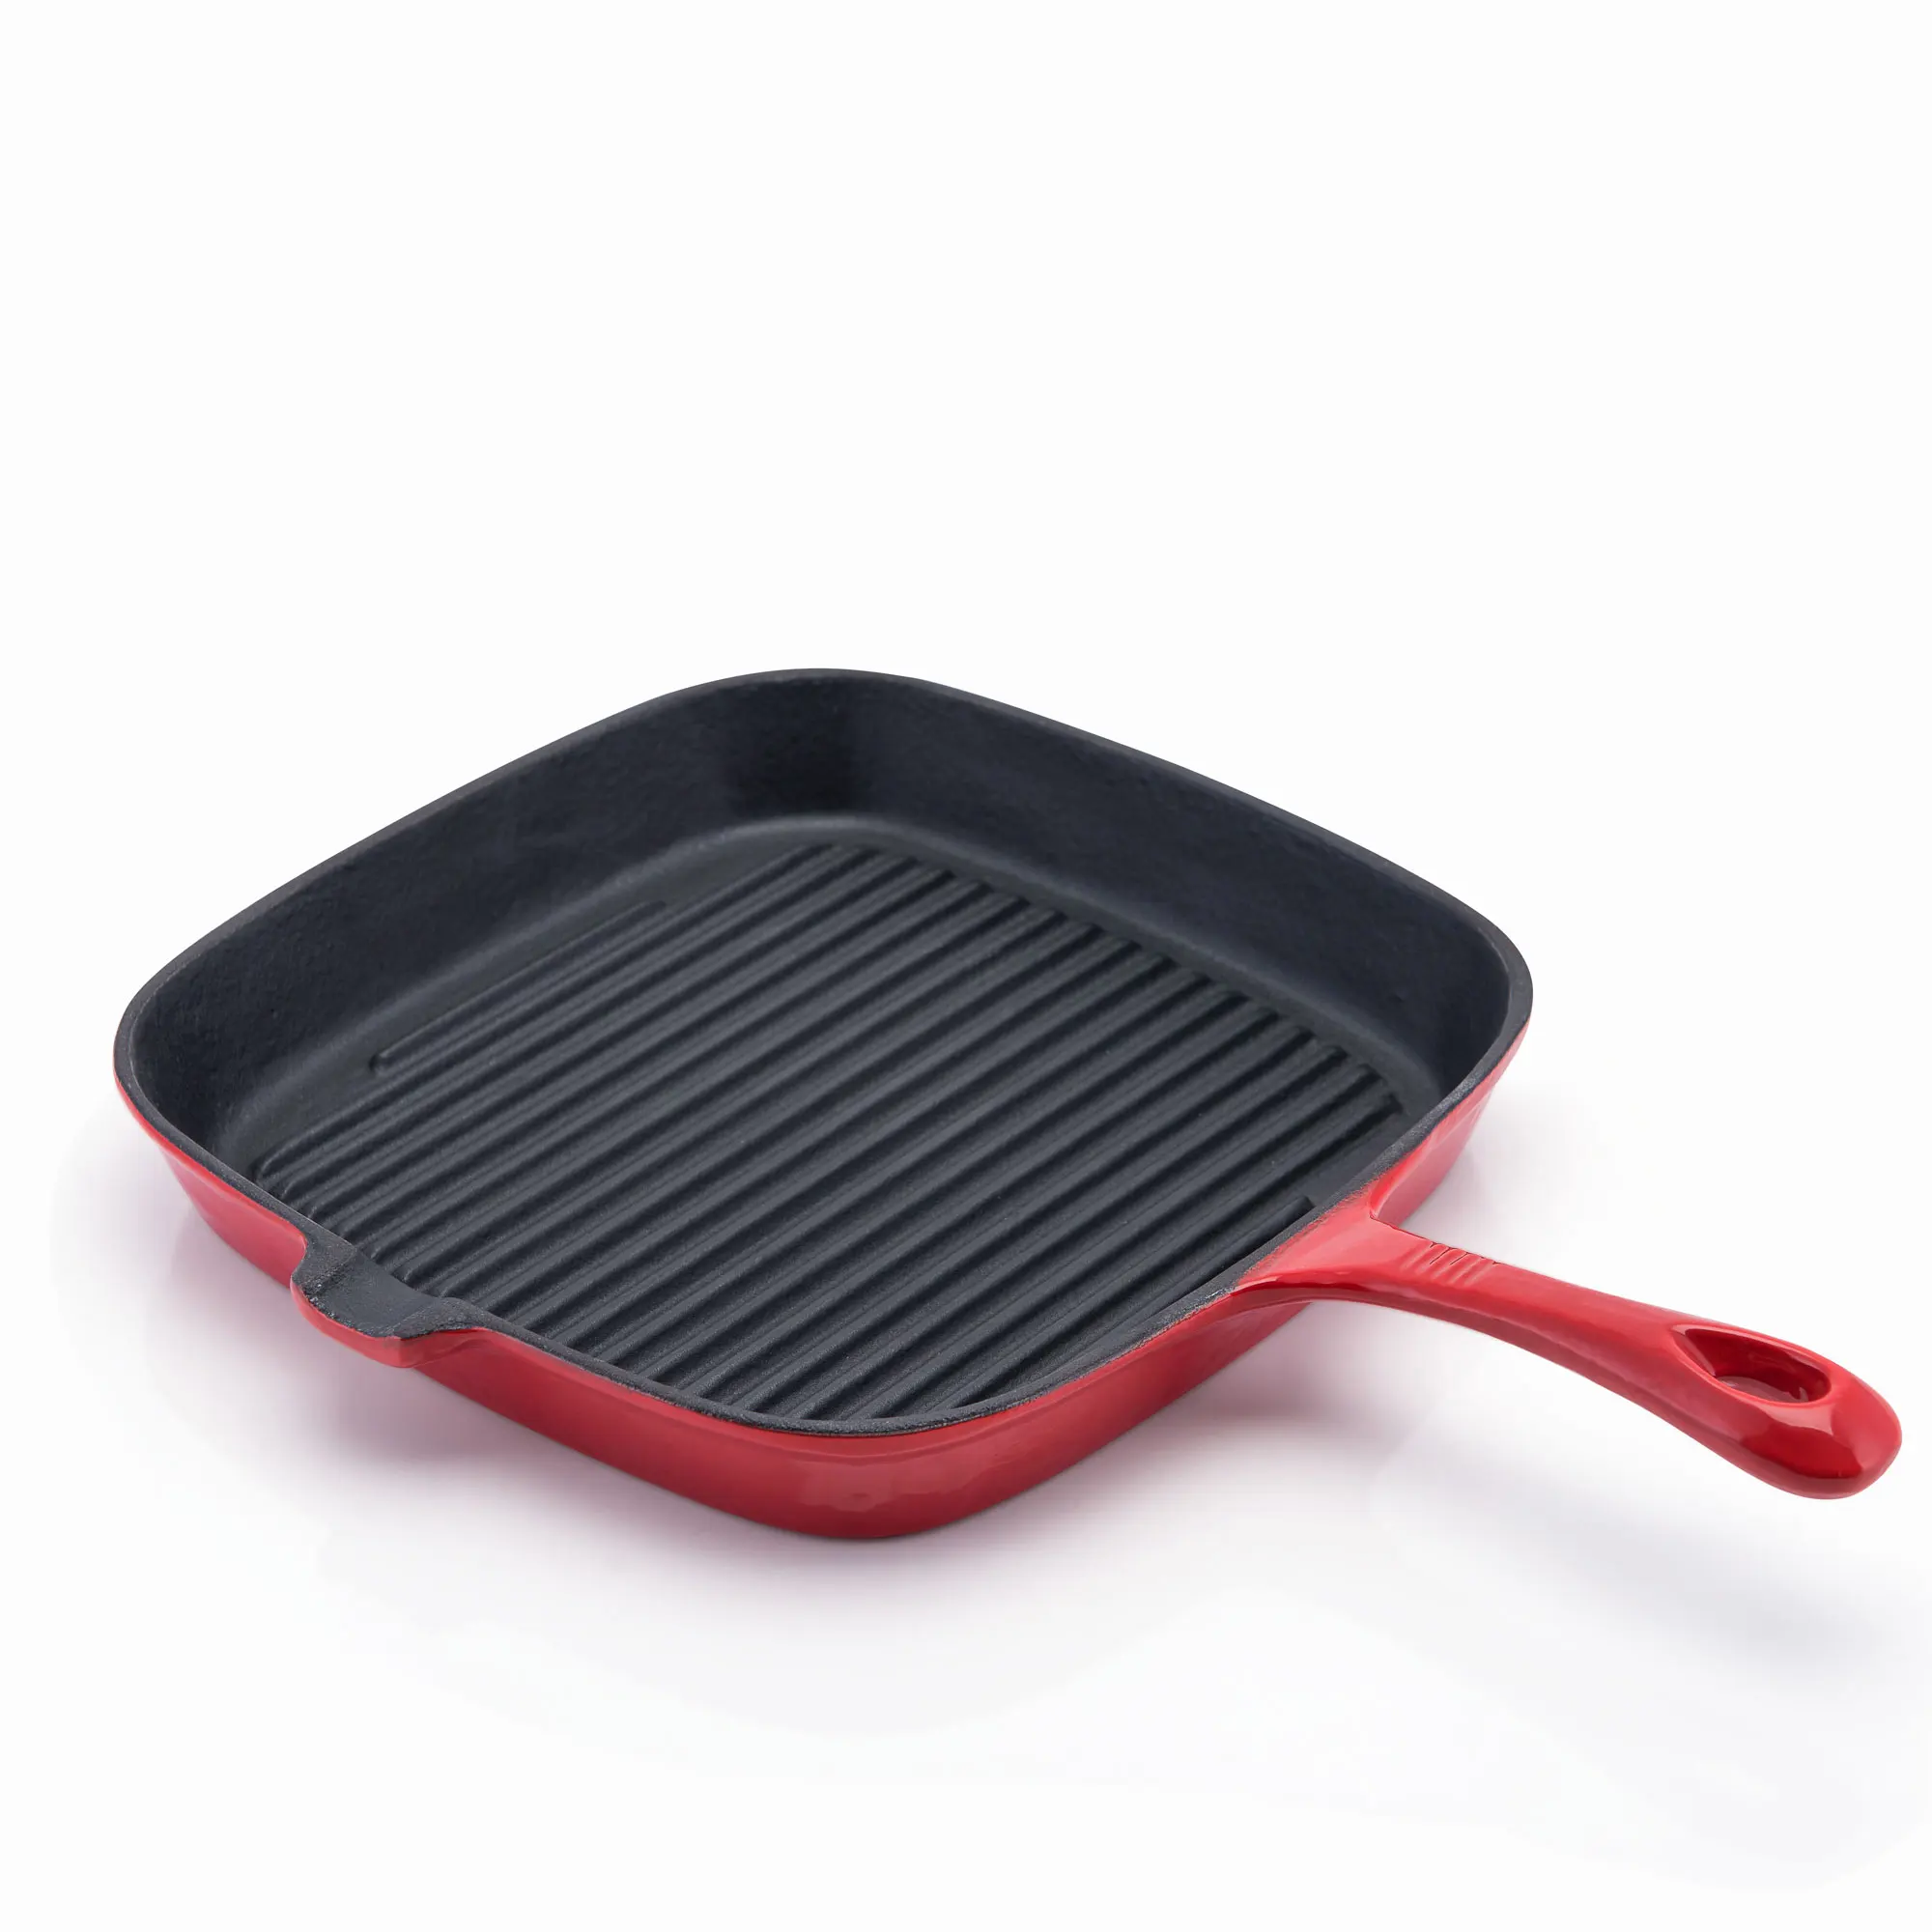 Cocinaware Pre-Seasoned Cast Iron Square Grill Pan - Shop Frying Pans &  Griddles at H-E-B